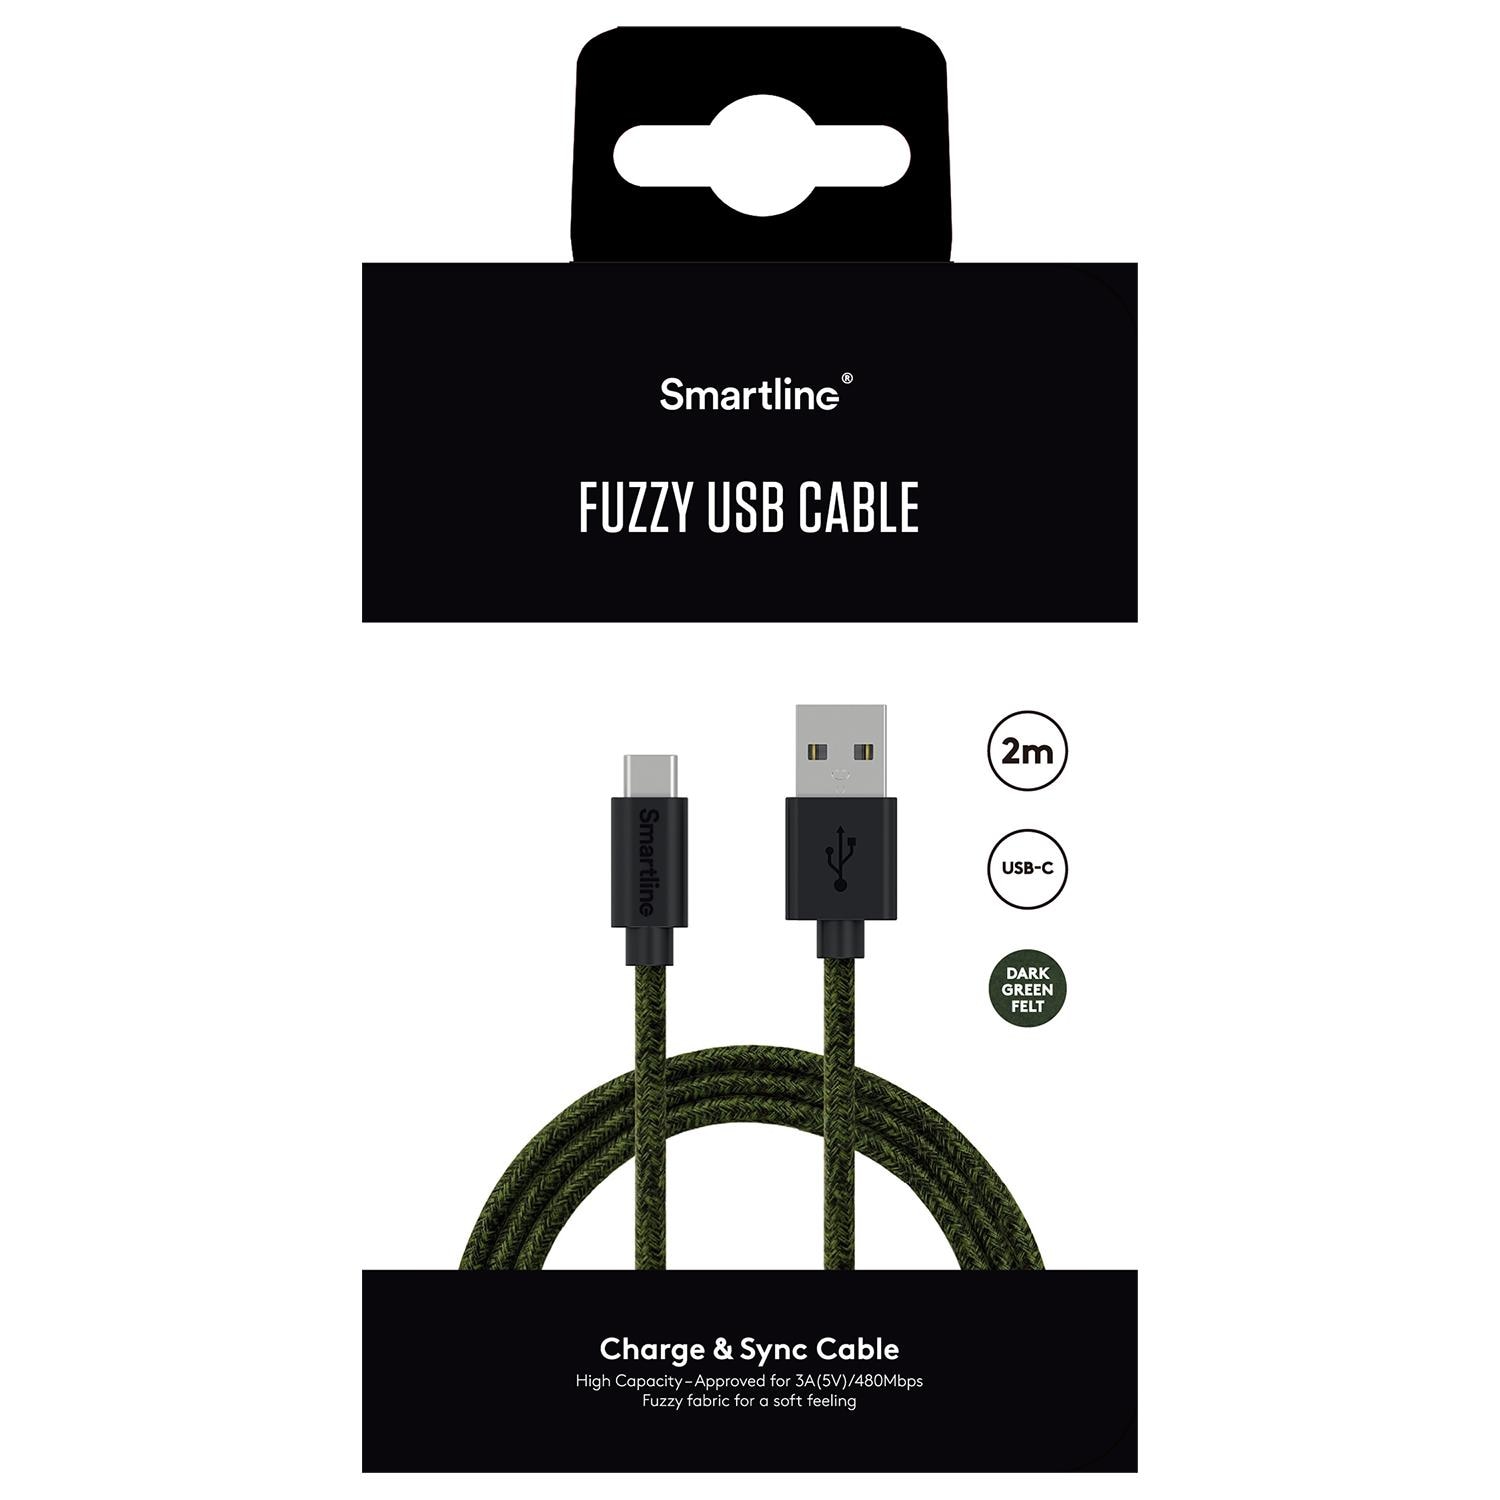 Fuzzy USB Cable USB-C 2m Green